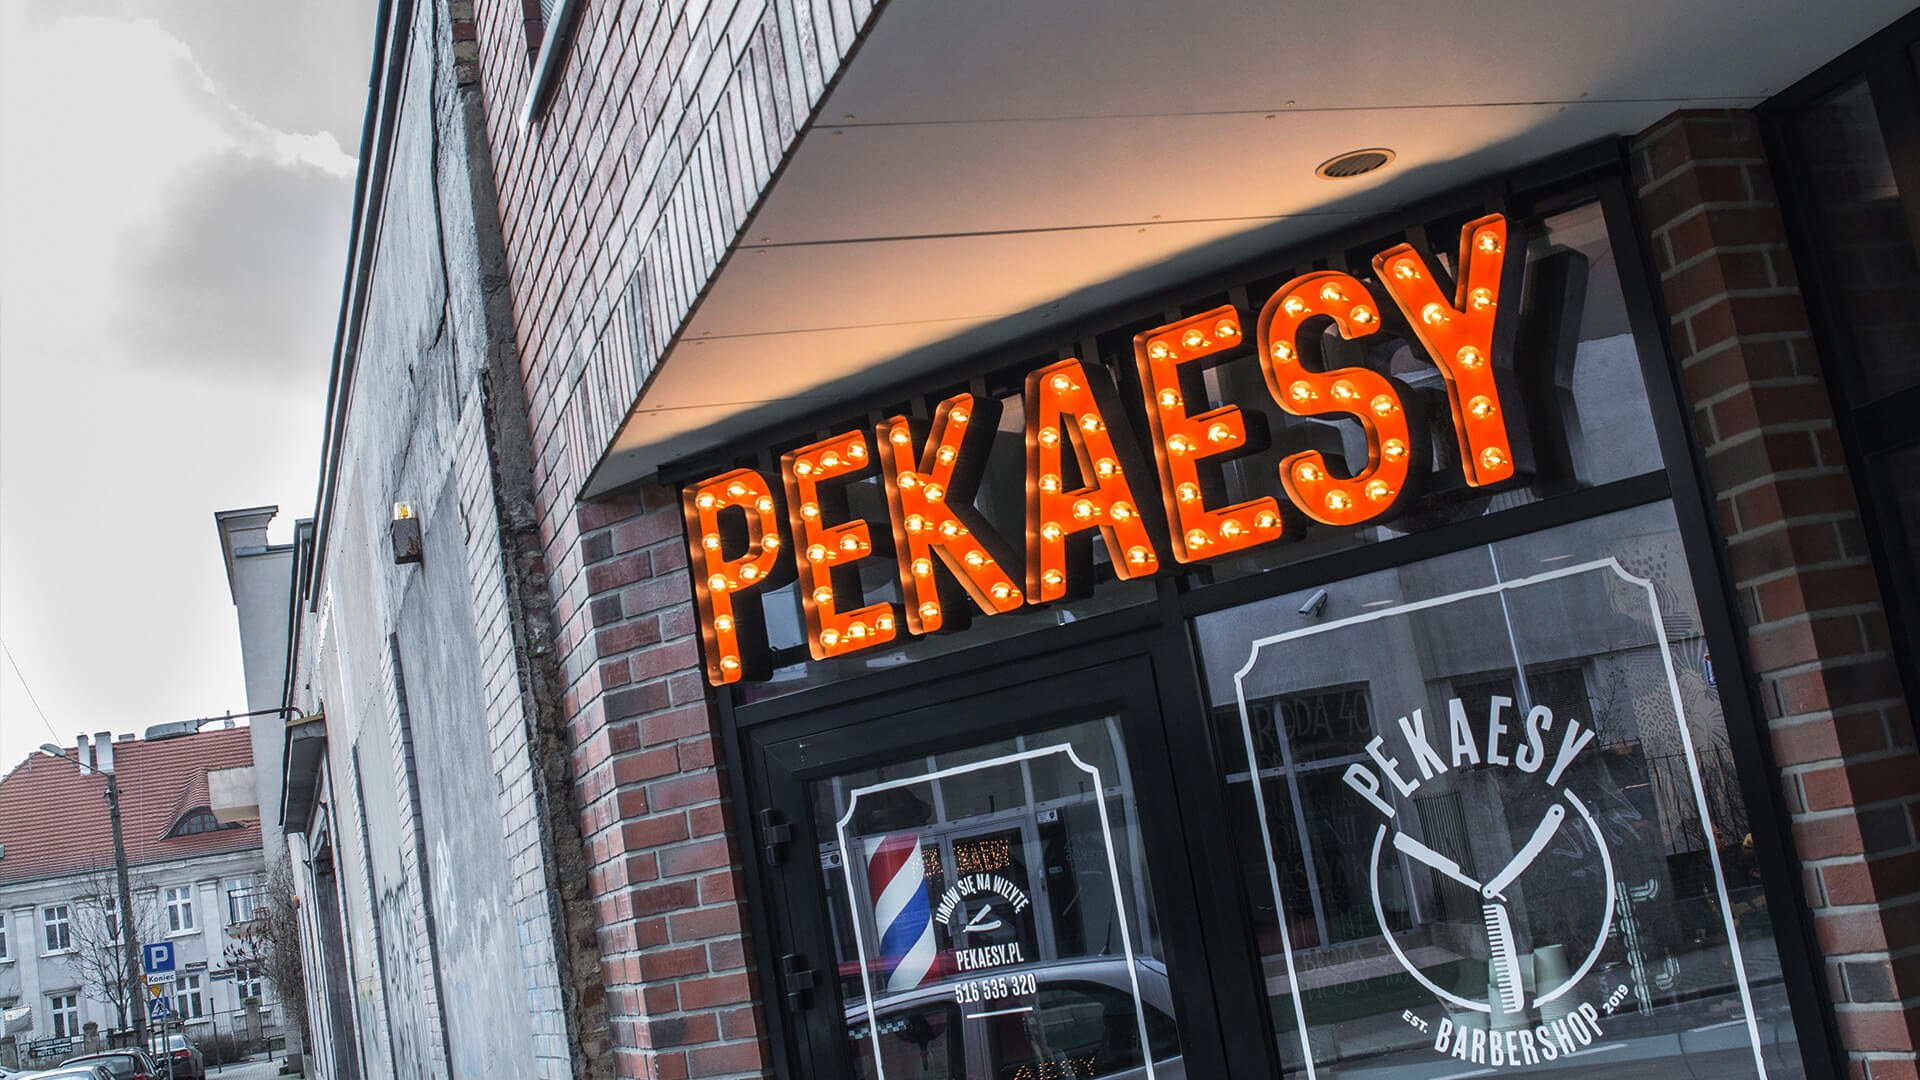 pekaesy hair salon barber shop - pekaesy-liters-with-lights-over-the-entry-to-barbera-liters-coloured-on-height-mounted-to-the-panel-on-the-window-logo-firm-liters-spatial-3d-poznan